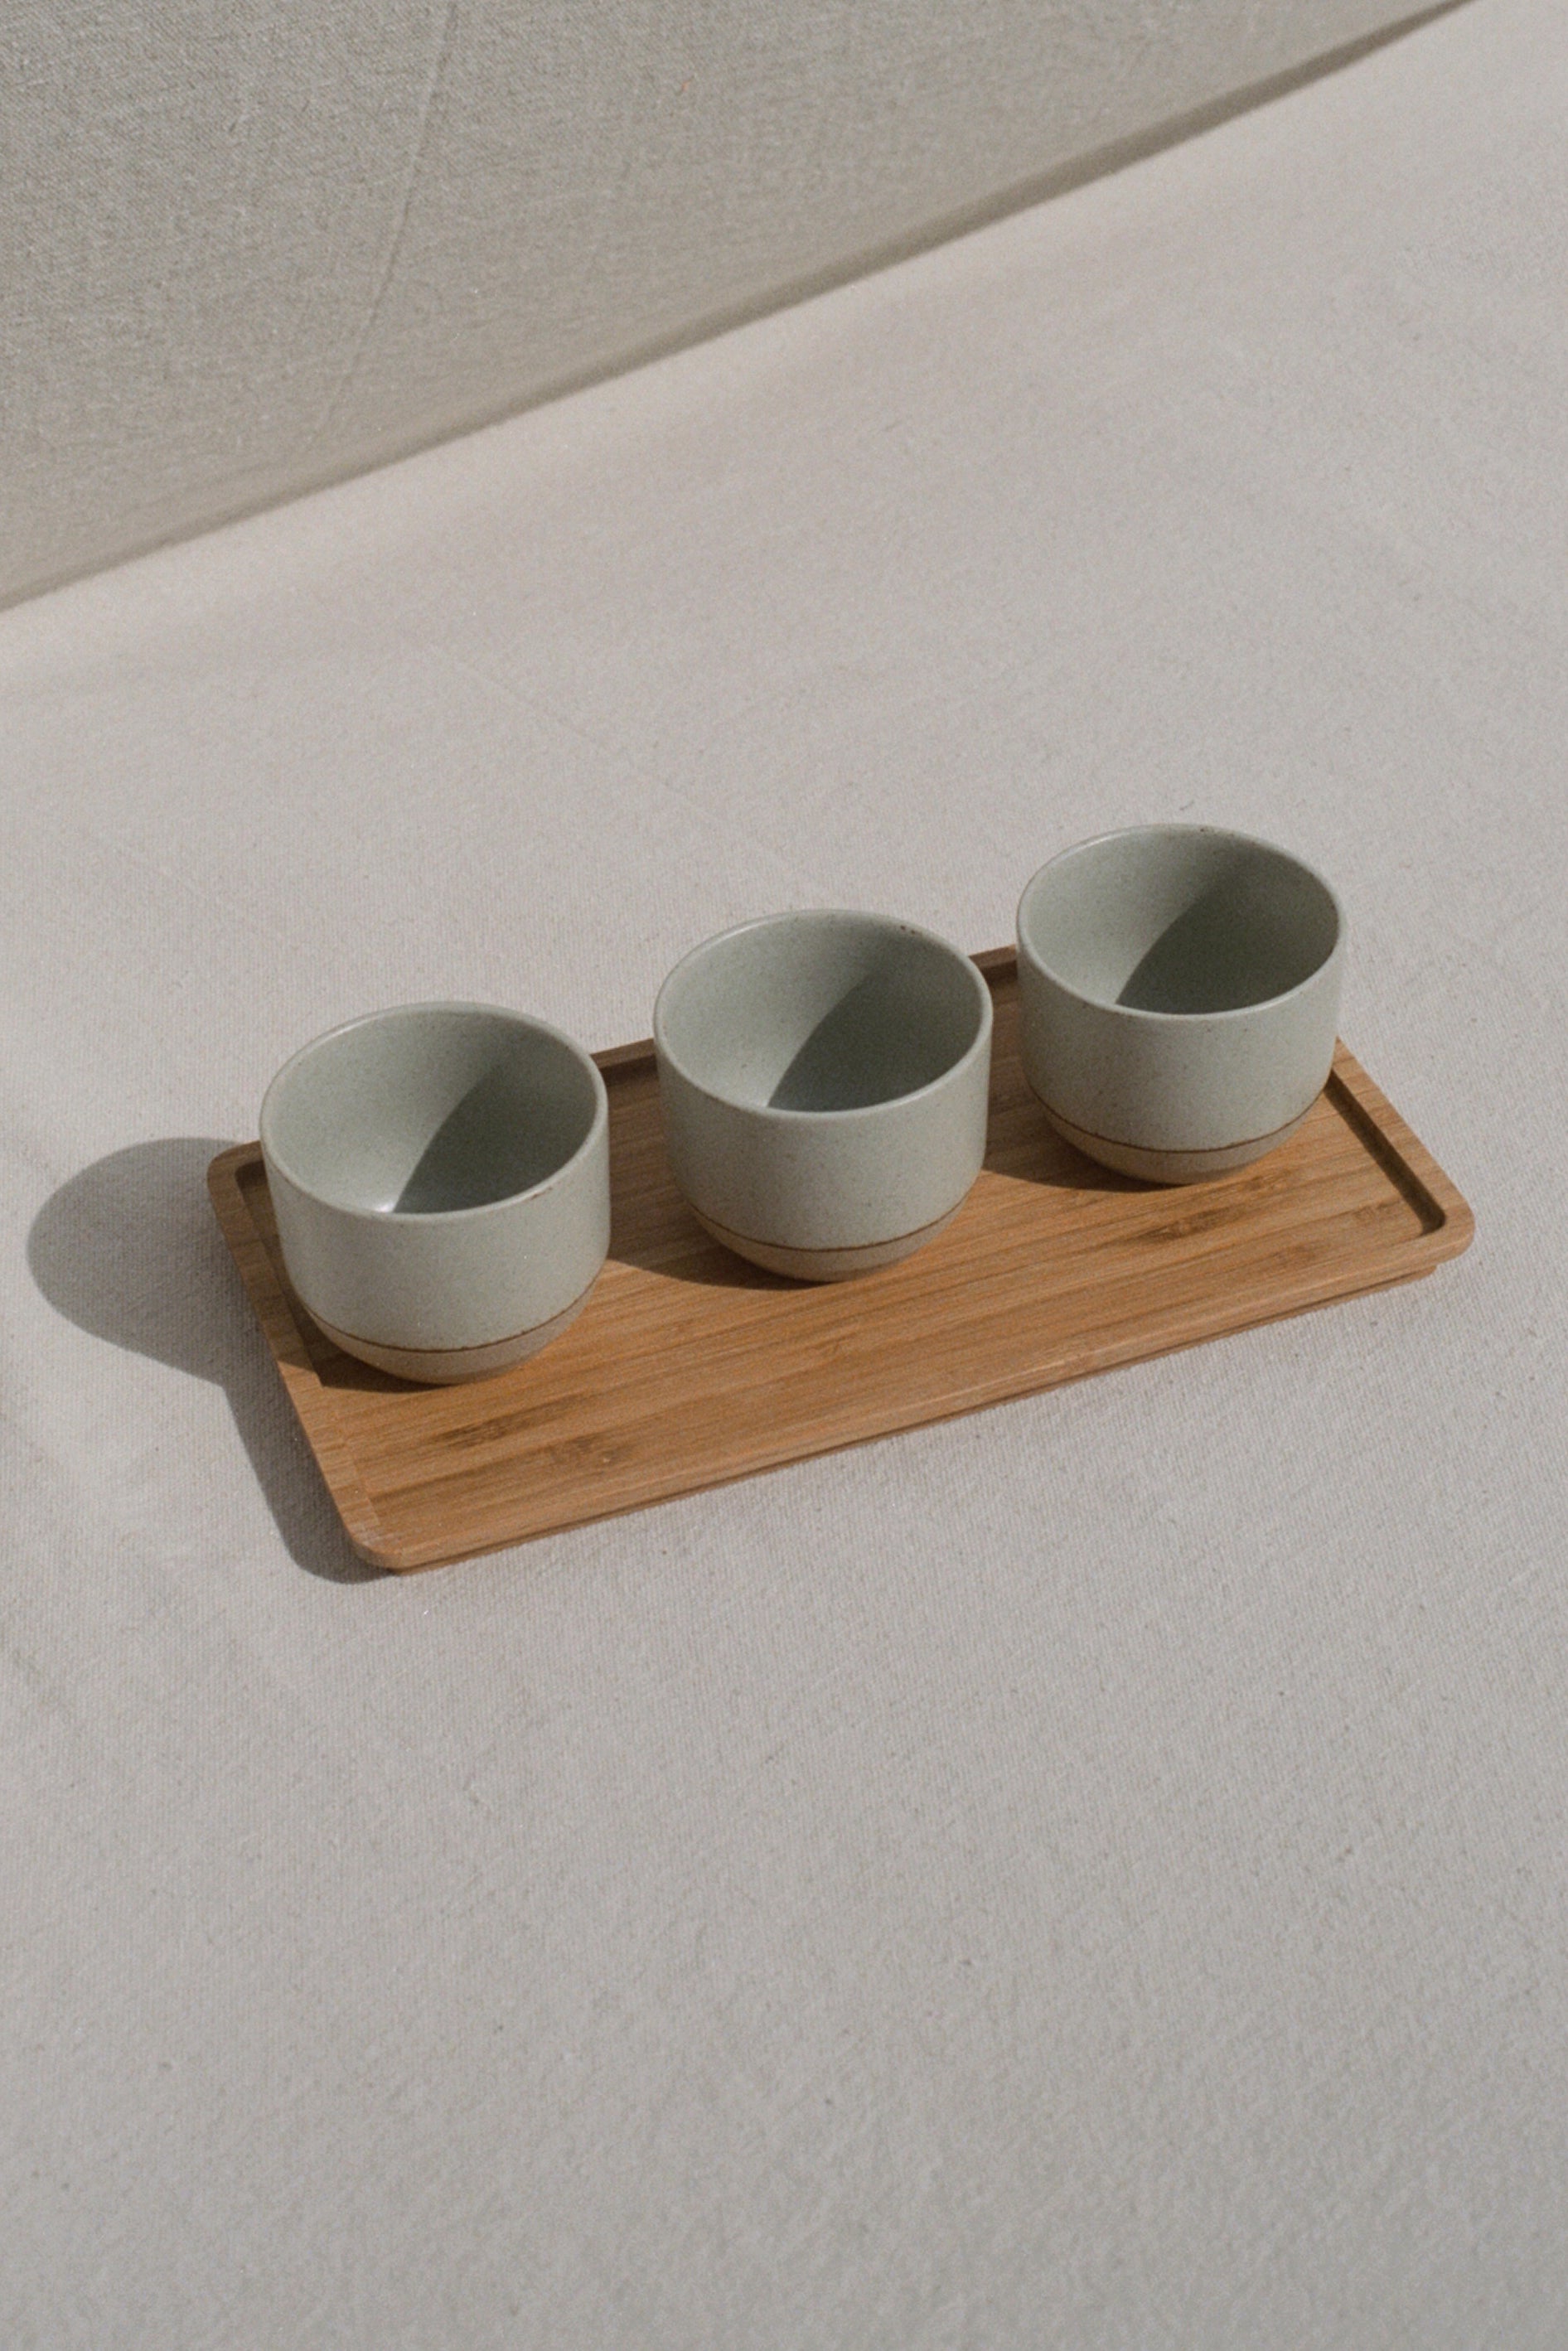 Teaware by Kinto Japan | H. SMITH